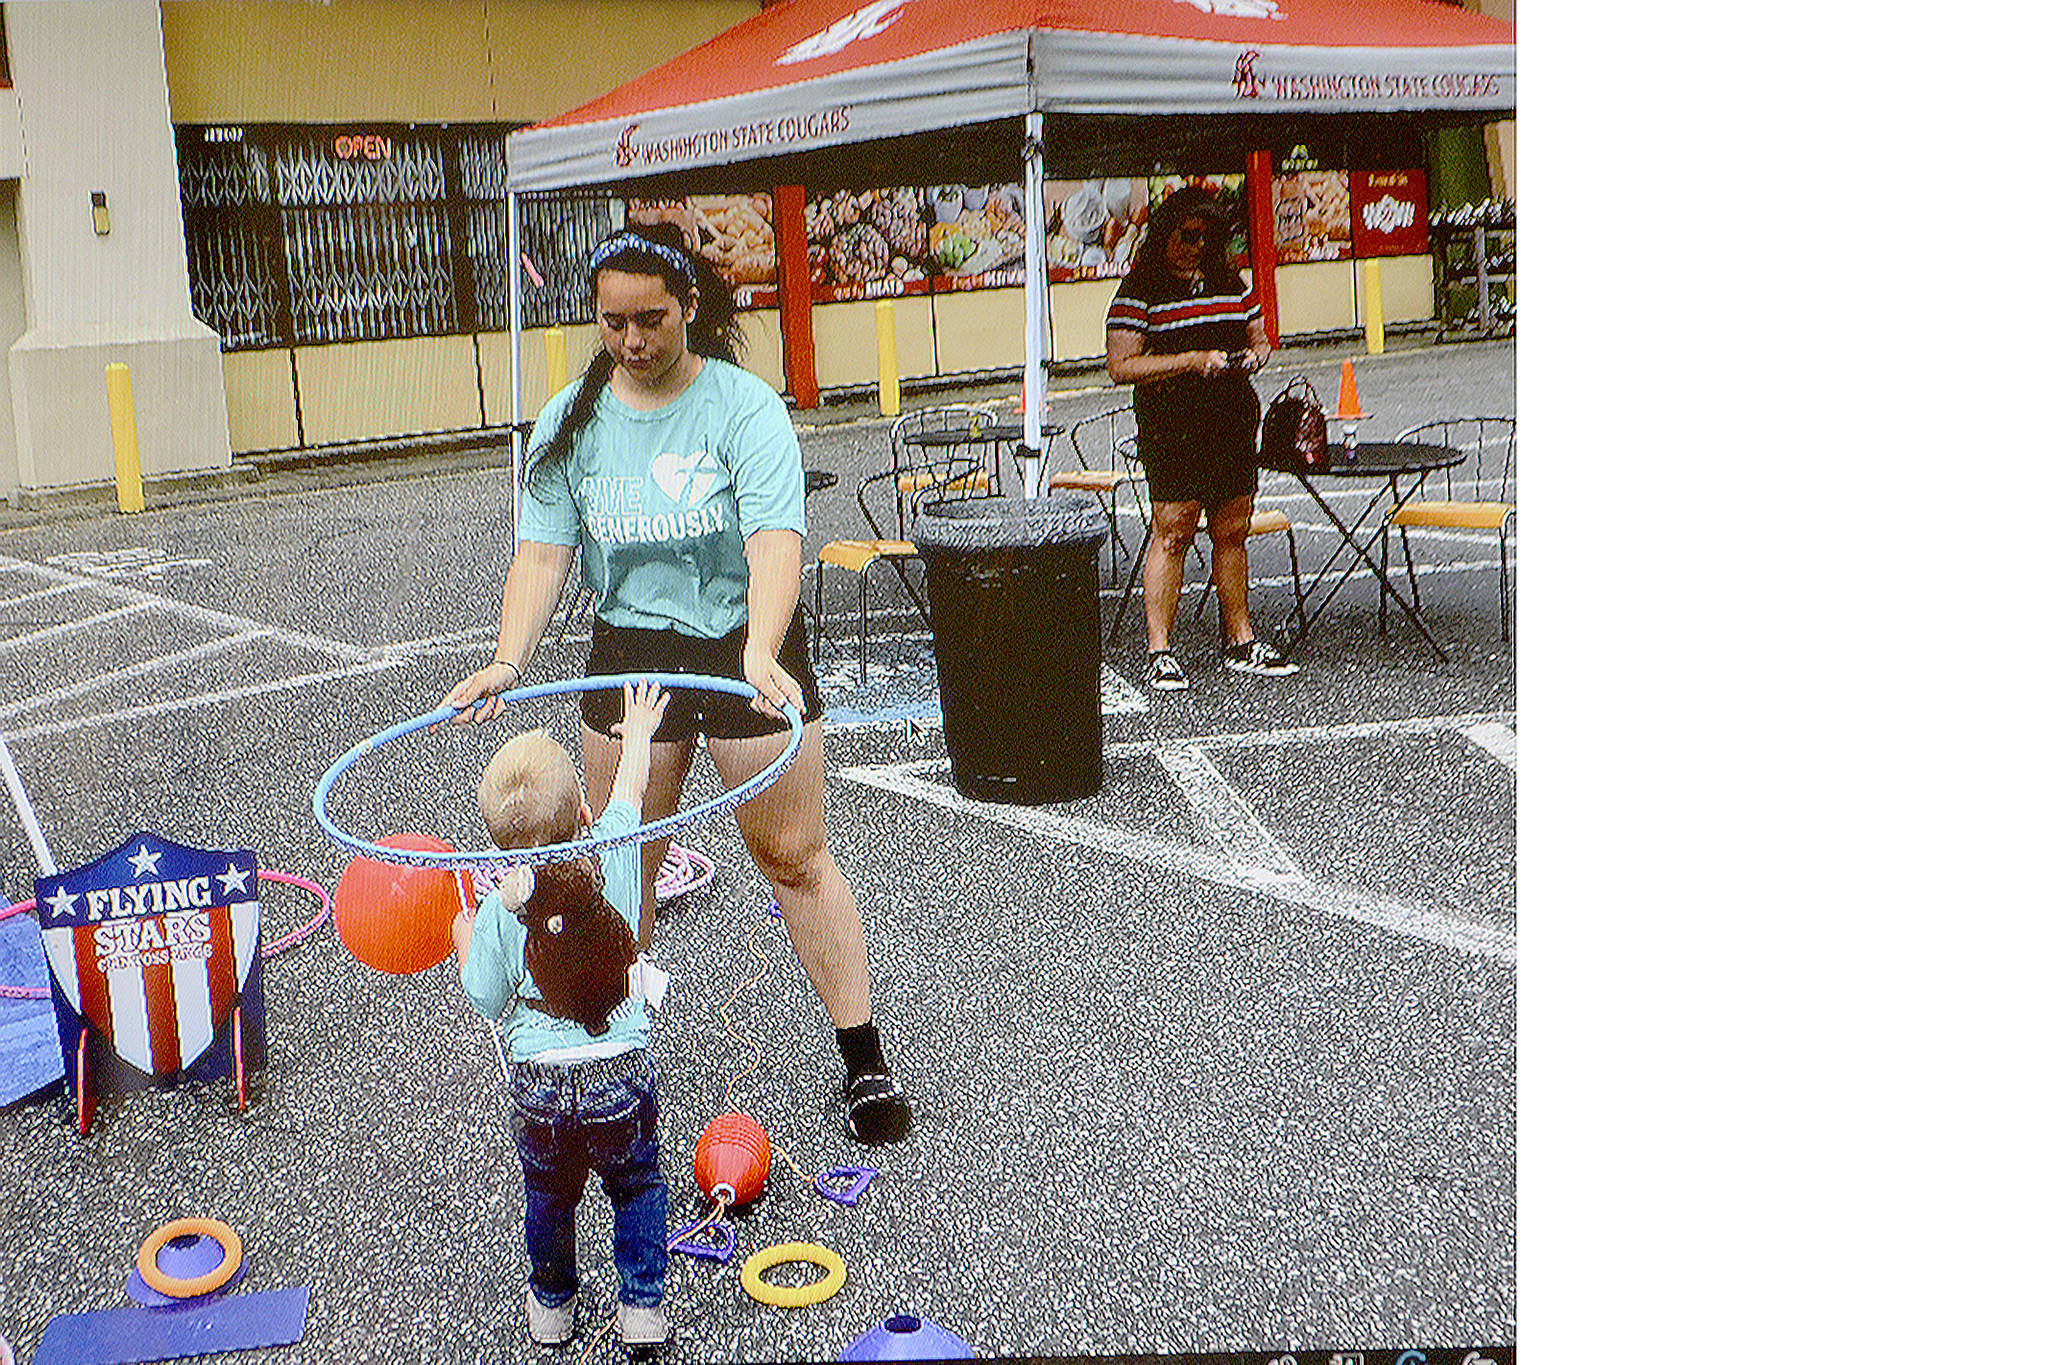 Chloe Braaten plays with her nephew, Matthew, at the Kids Tent at the Marysville Farmers Market on a recent Saturday. (Courtesy Photo)